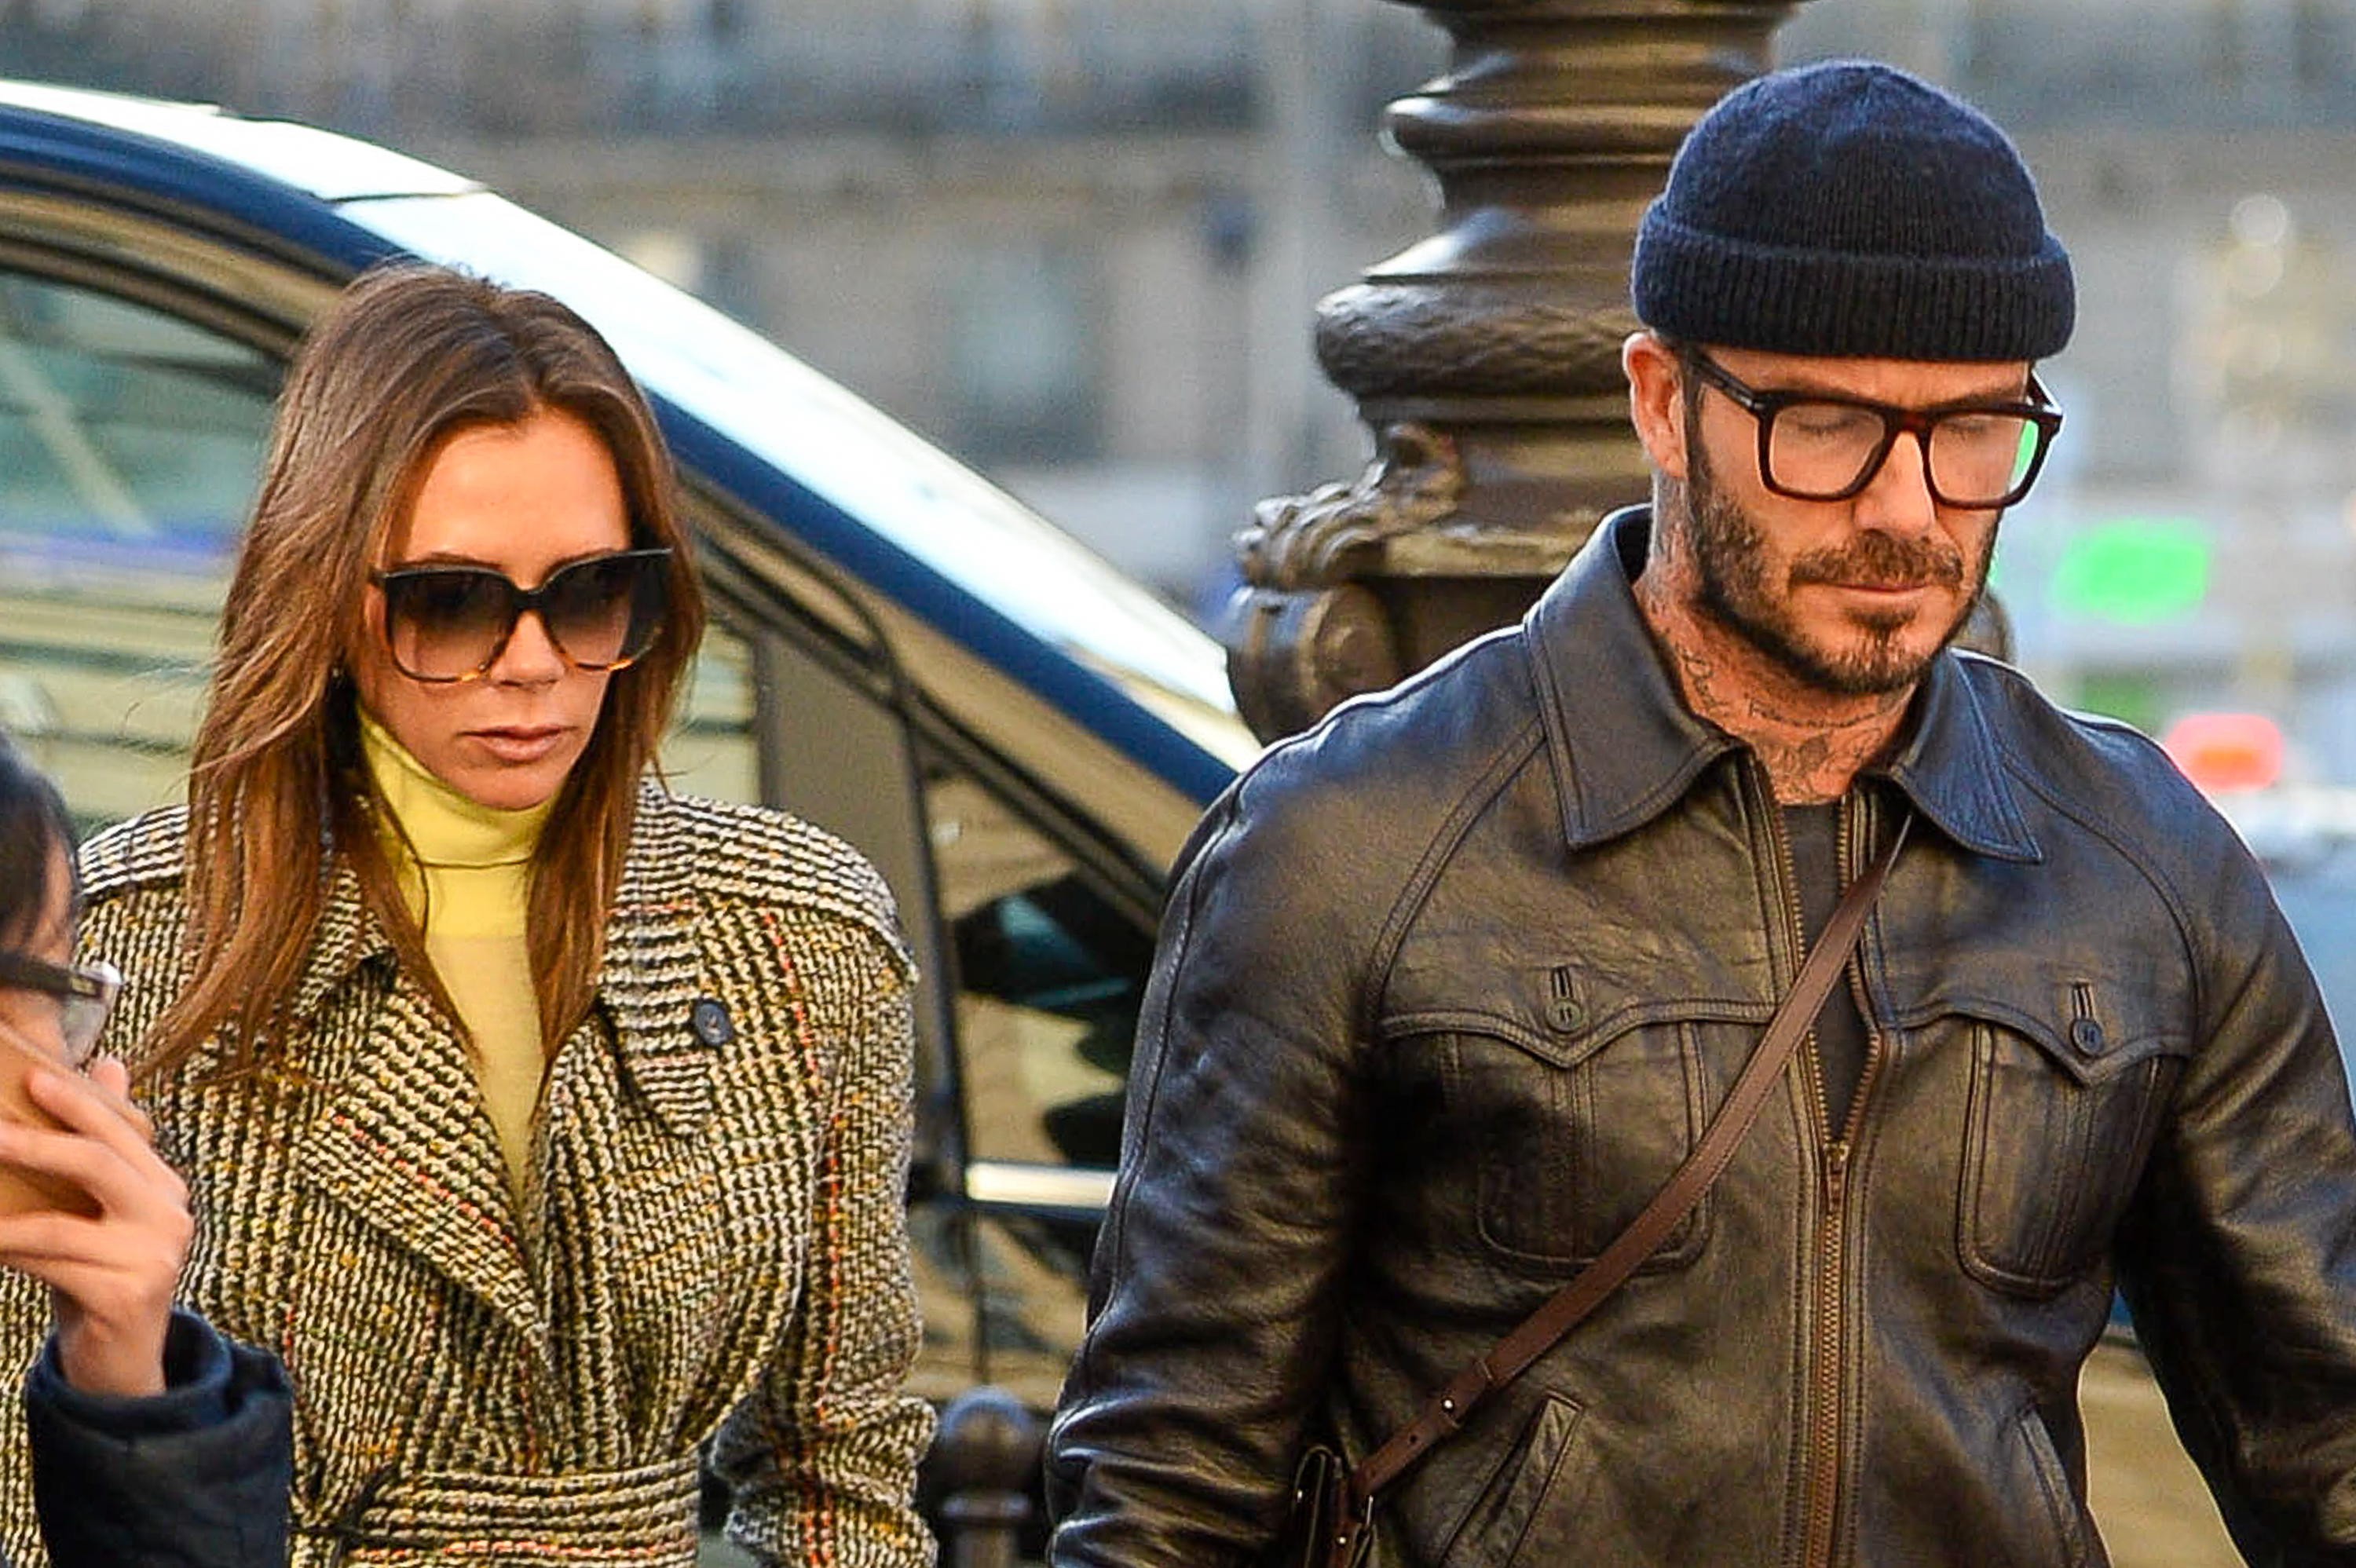 Victoria Beckham and David Beckham pictured at Gare du Nord station on January 18, 2020 in Paris, France | Source: Getty Images